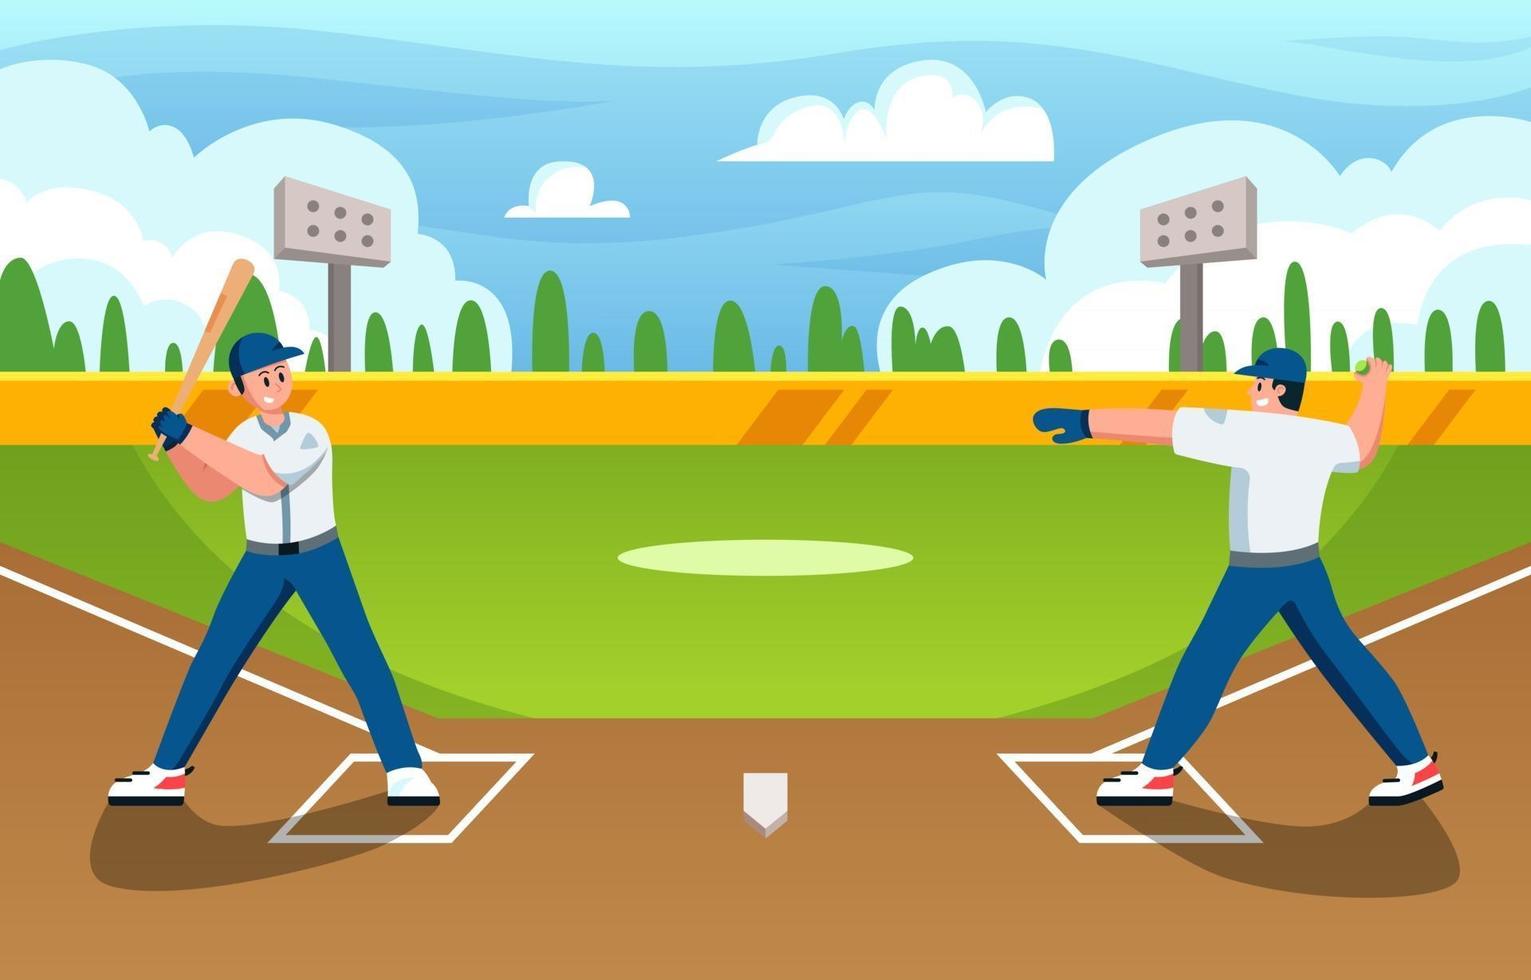 Playing Softball with Friend in Summer Day vector